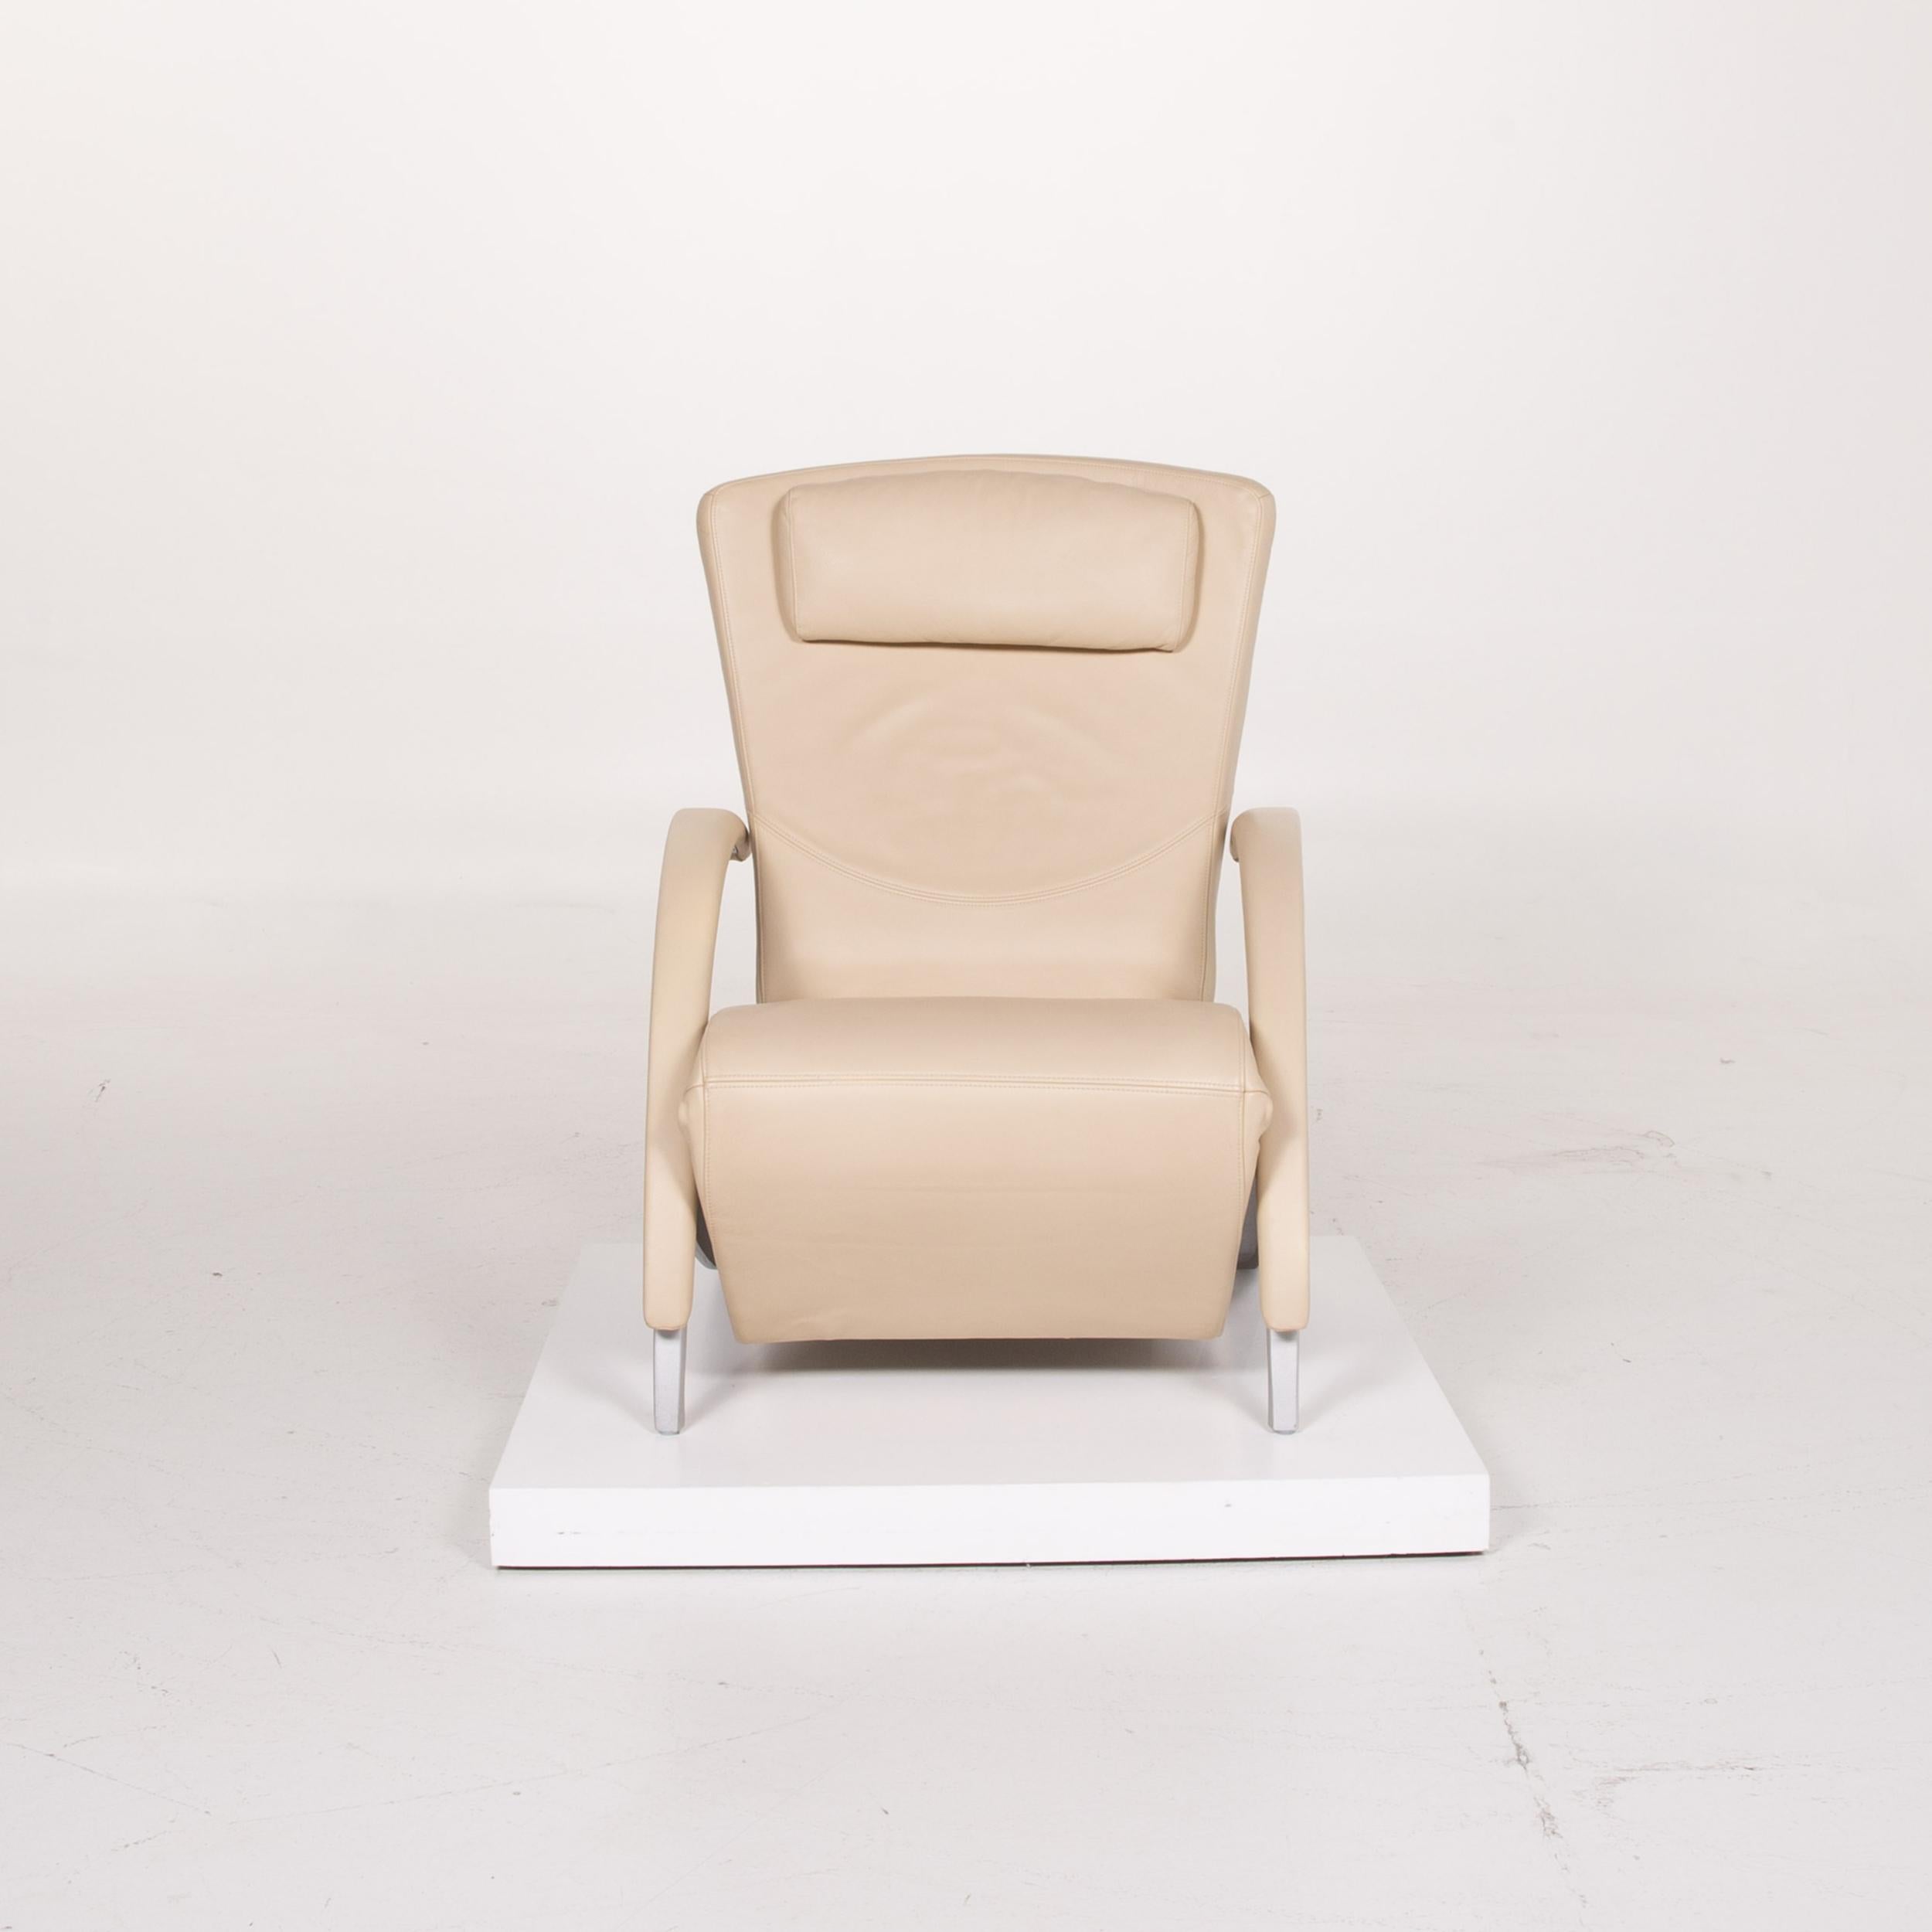 German Rolf Benz 3100 Leather Armchair Cream Lounger For Sale